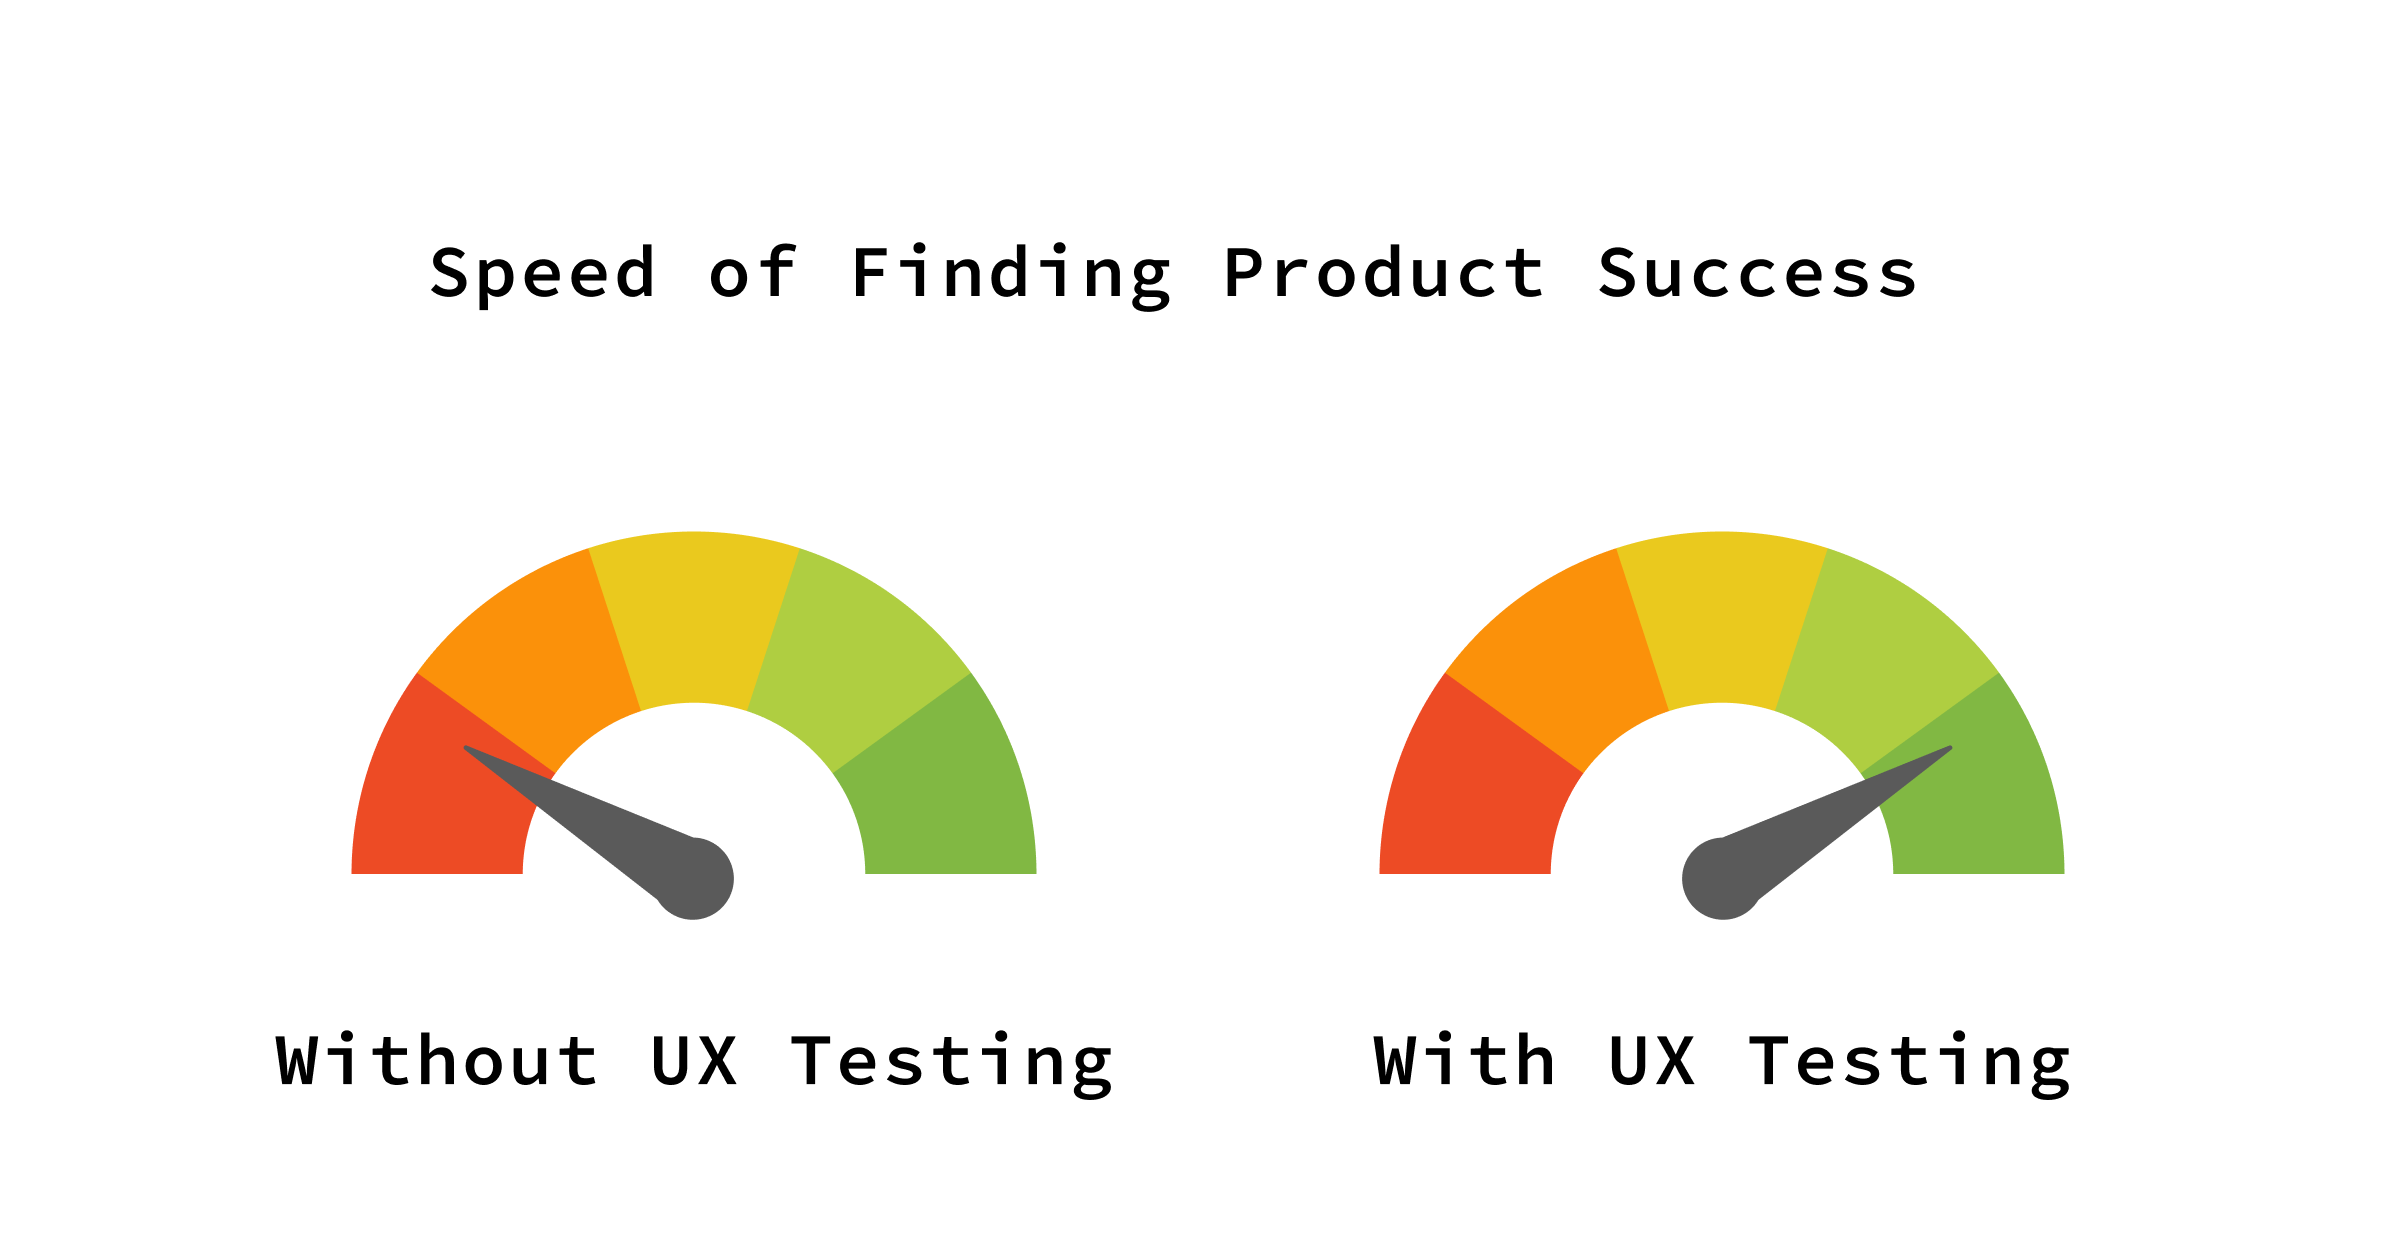 Products Find Success Faster With UX Research Than Without It